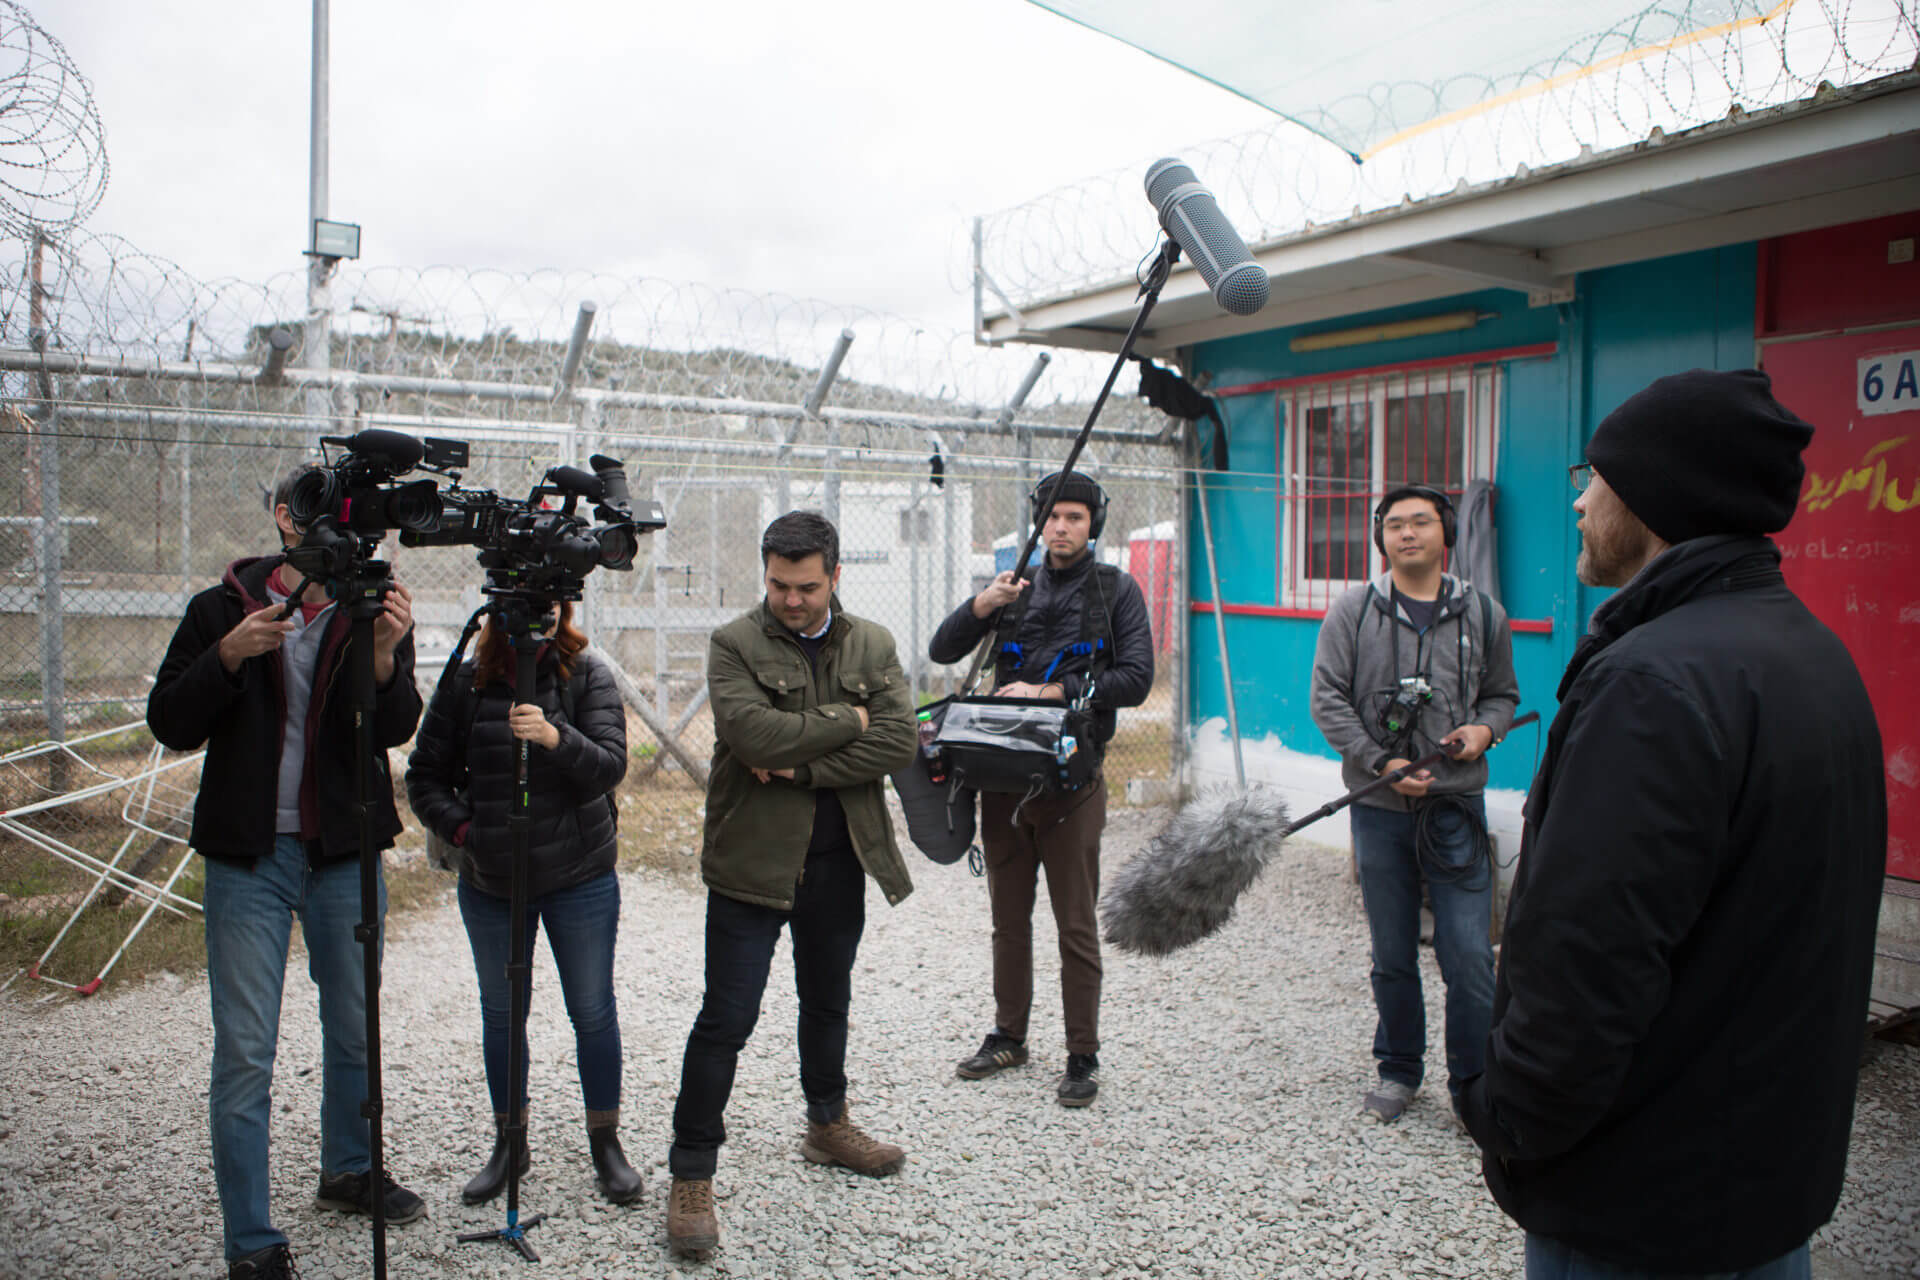 Director Daniel Druhora and several members of the documentary film crew have cameras and microphones pointed at course instructor Brad Cracchiola inside Camp Moria.